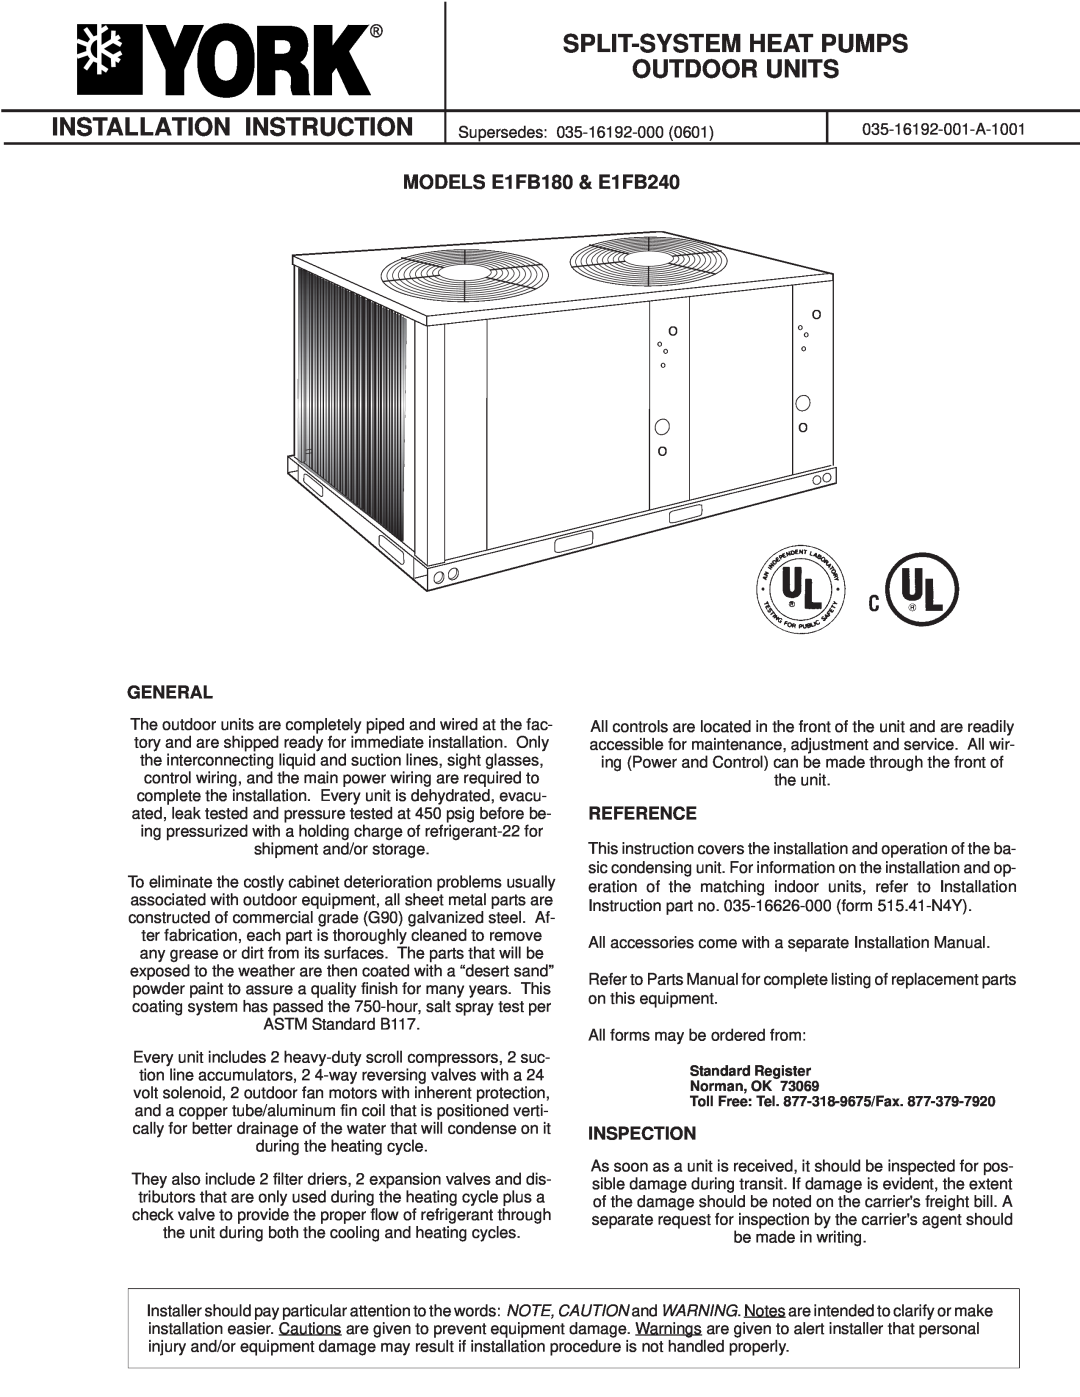 York E1FB240, E1FB180 installation manual Installation Instruction, General, Reference, Inspection, Split-Systemheat Pumps 